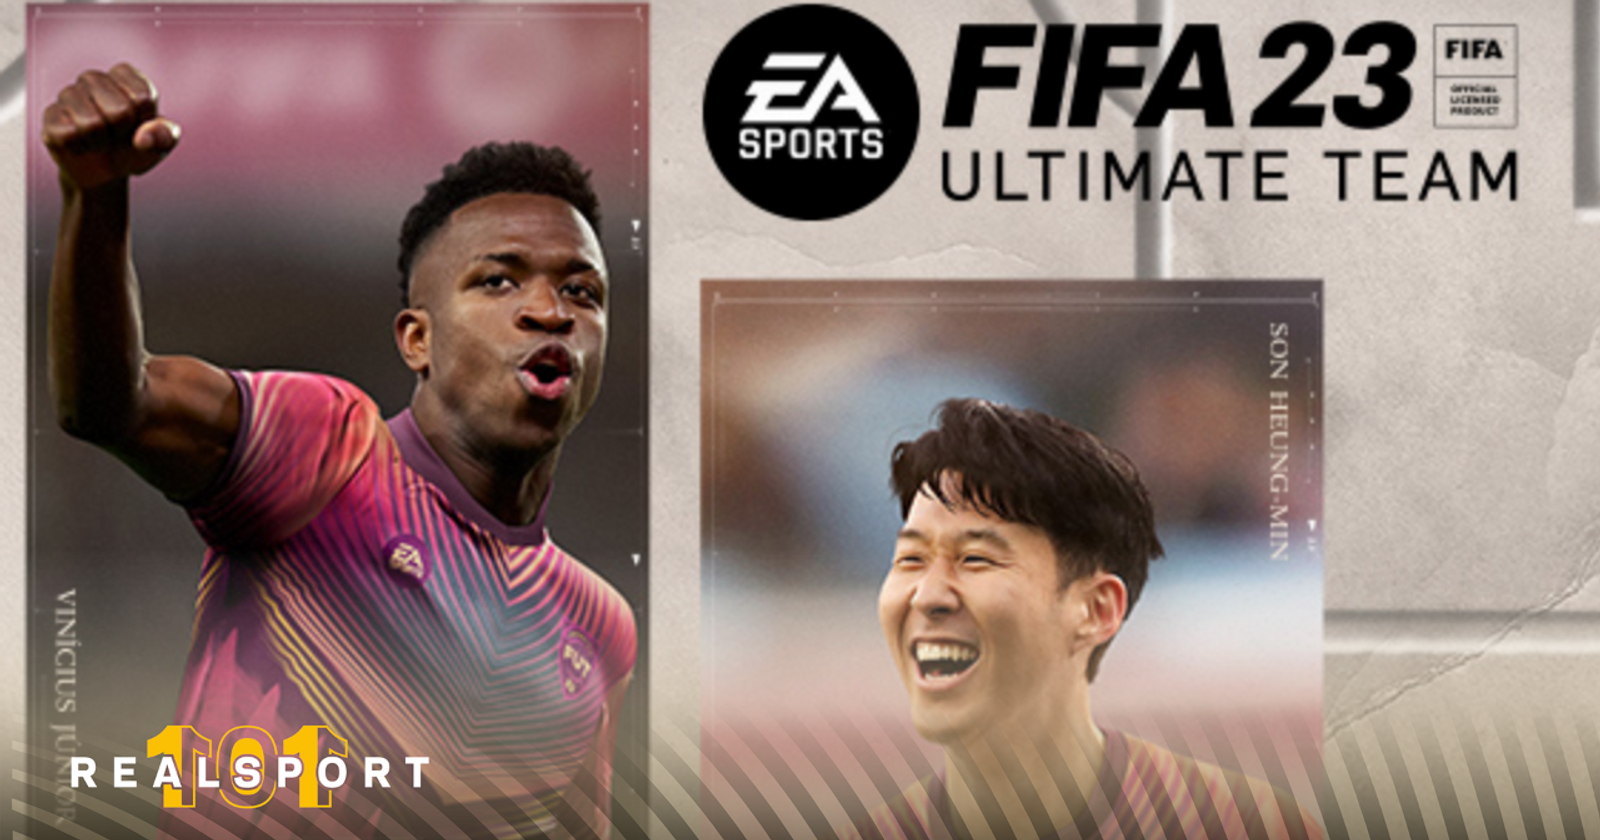 How to claim Free FIFA 23 Ultimate Team Twitch Prime Gaming Pack (June 2023)